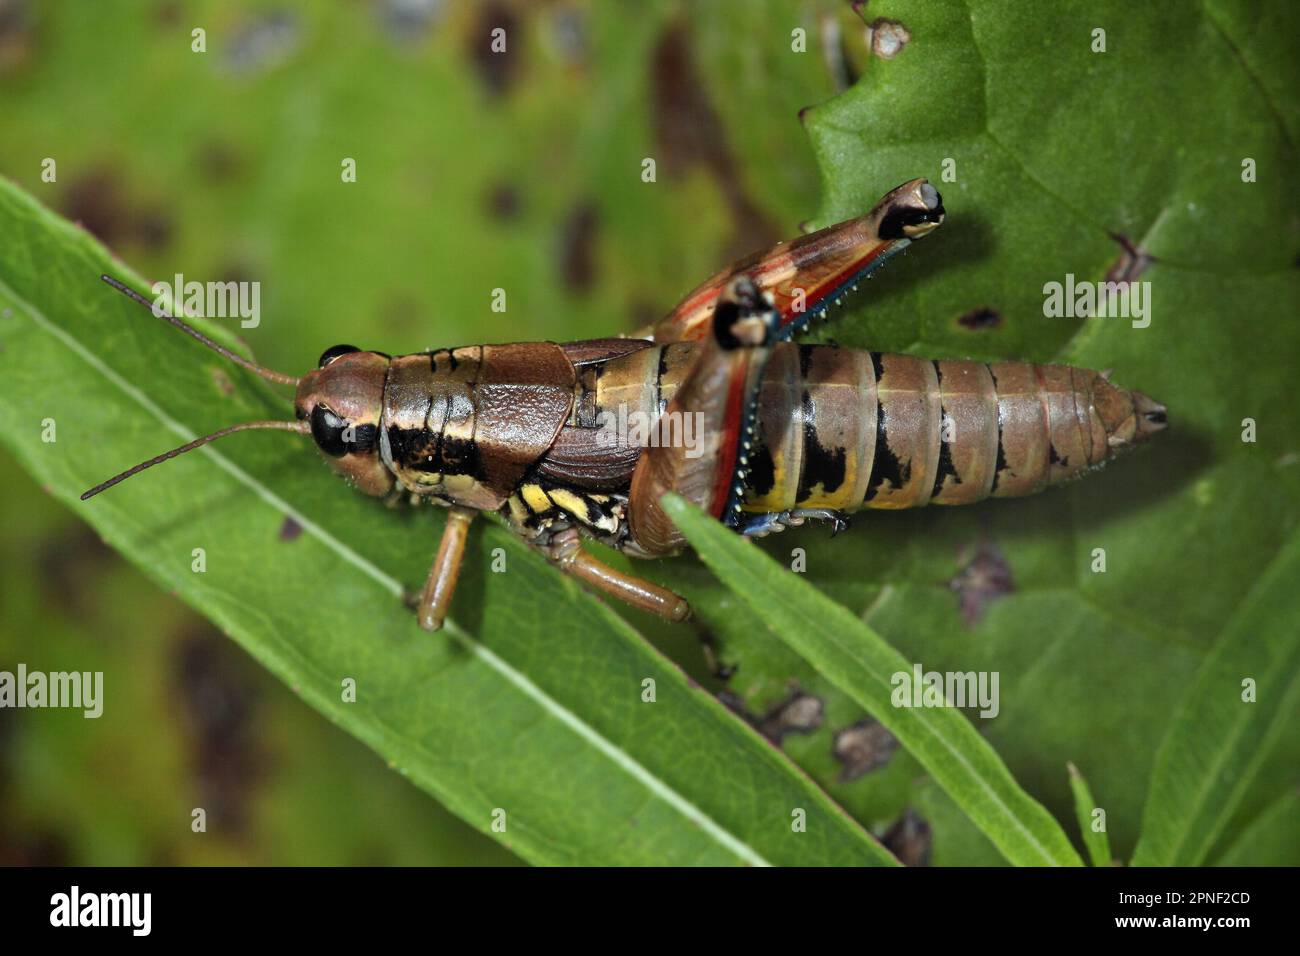 Brown mountain grasshopper (Podisma pedestris), sitting on a leaf, view from above, Germany Stock Photo